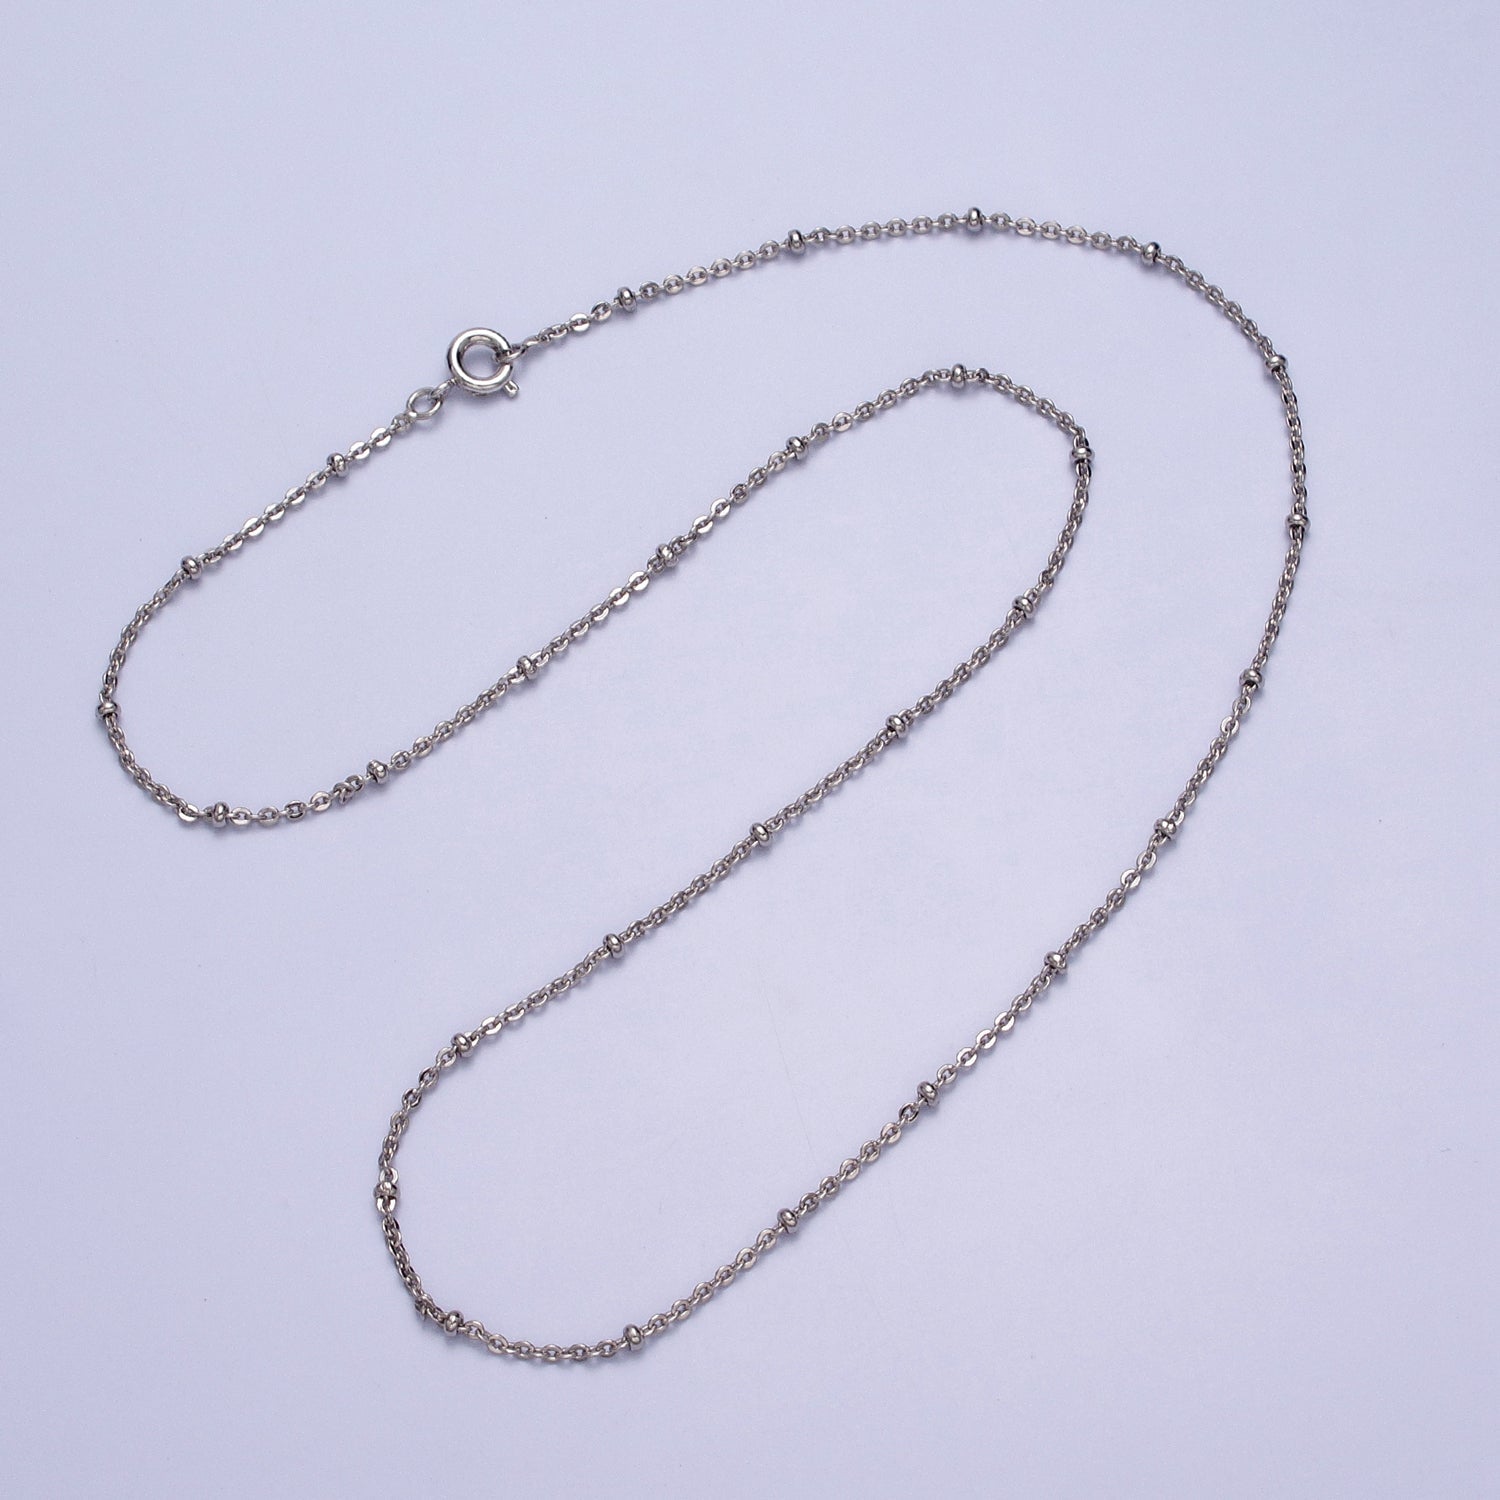 1mm Beaded Satellite Chain Silver Satellite Necklace Dainty Simple Everyday 16.5 Inch Layering Necklace for Minimalist Jewelry WA-1594 - DLUXCA